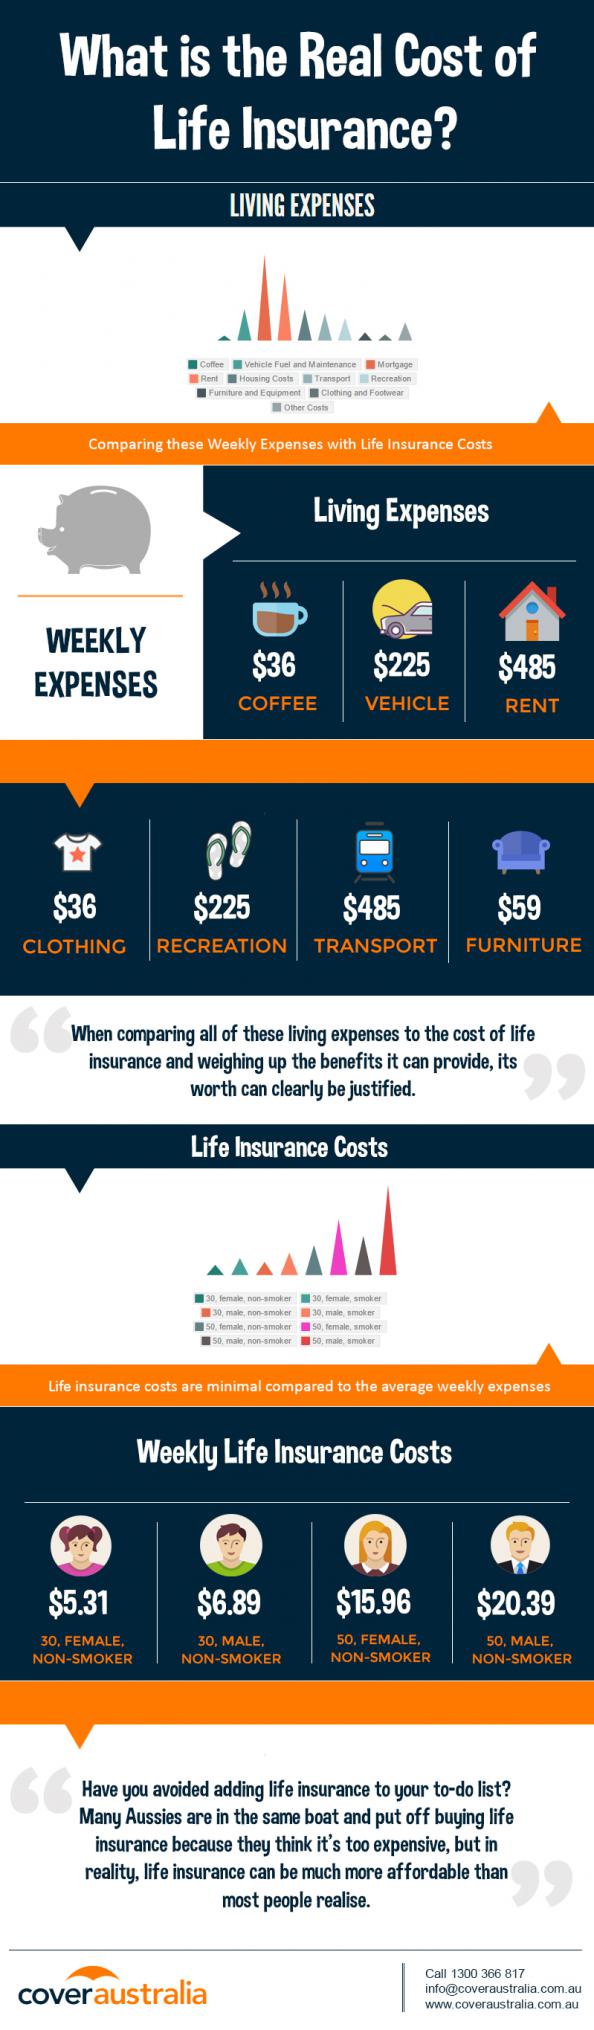 The Real Cost of Life Insurance